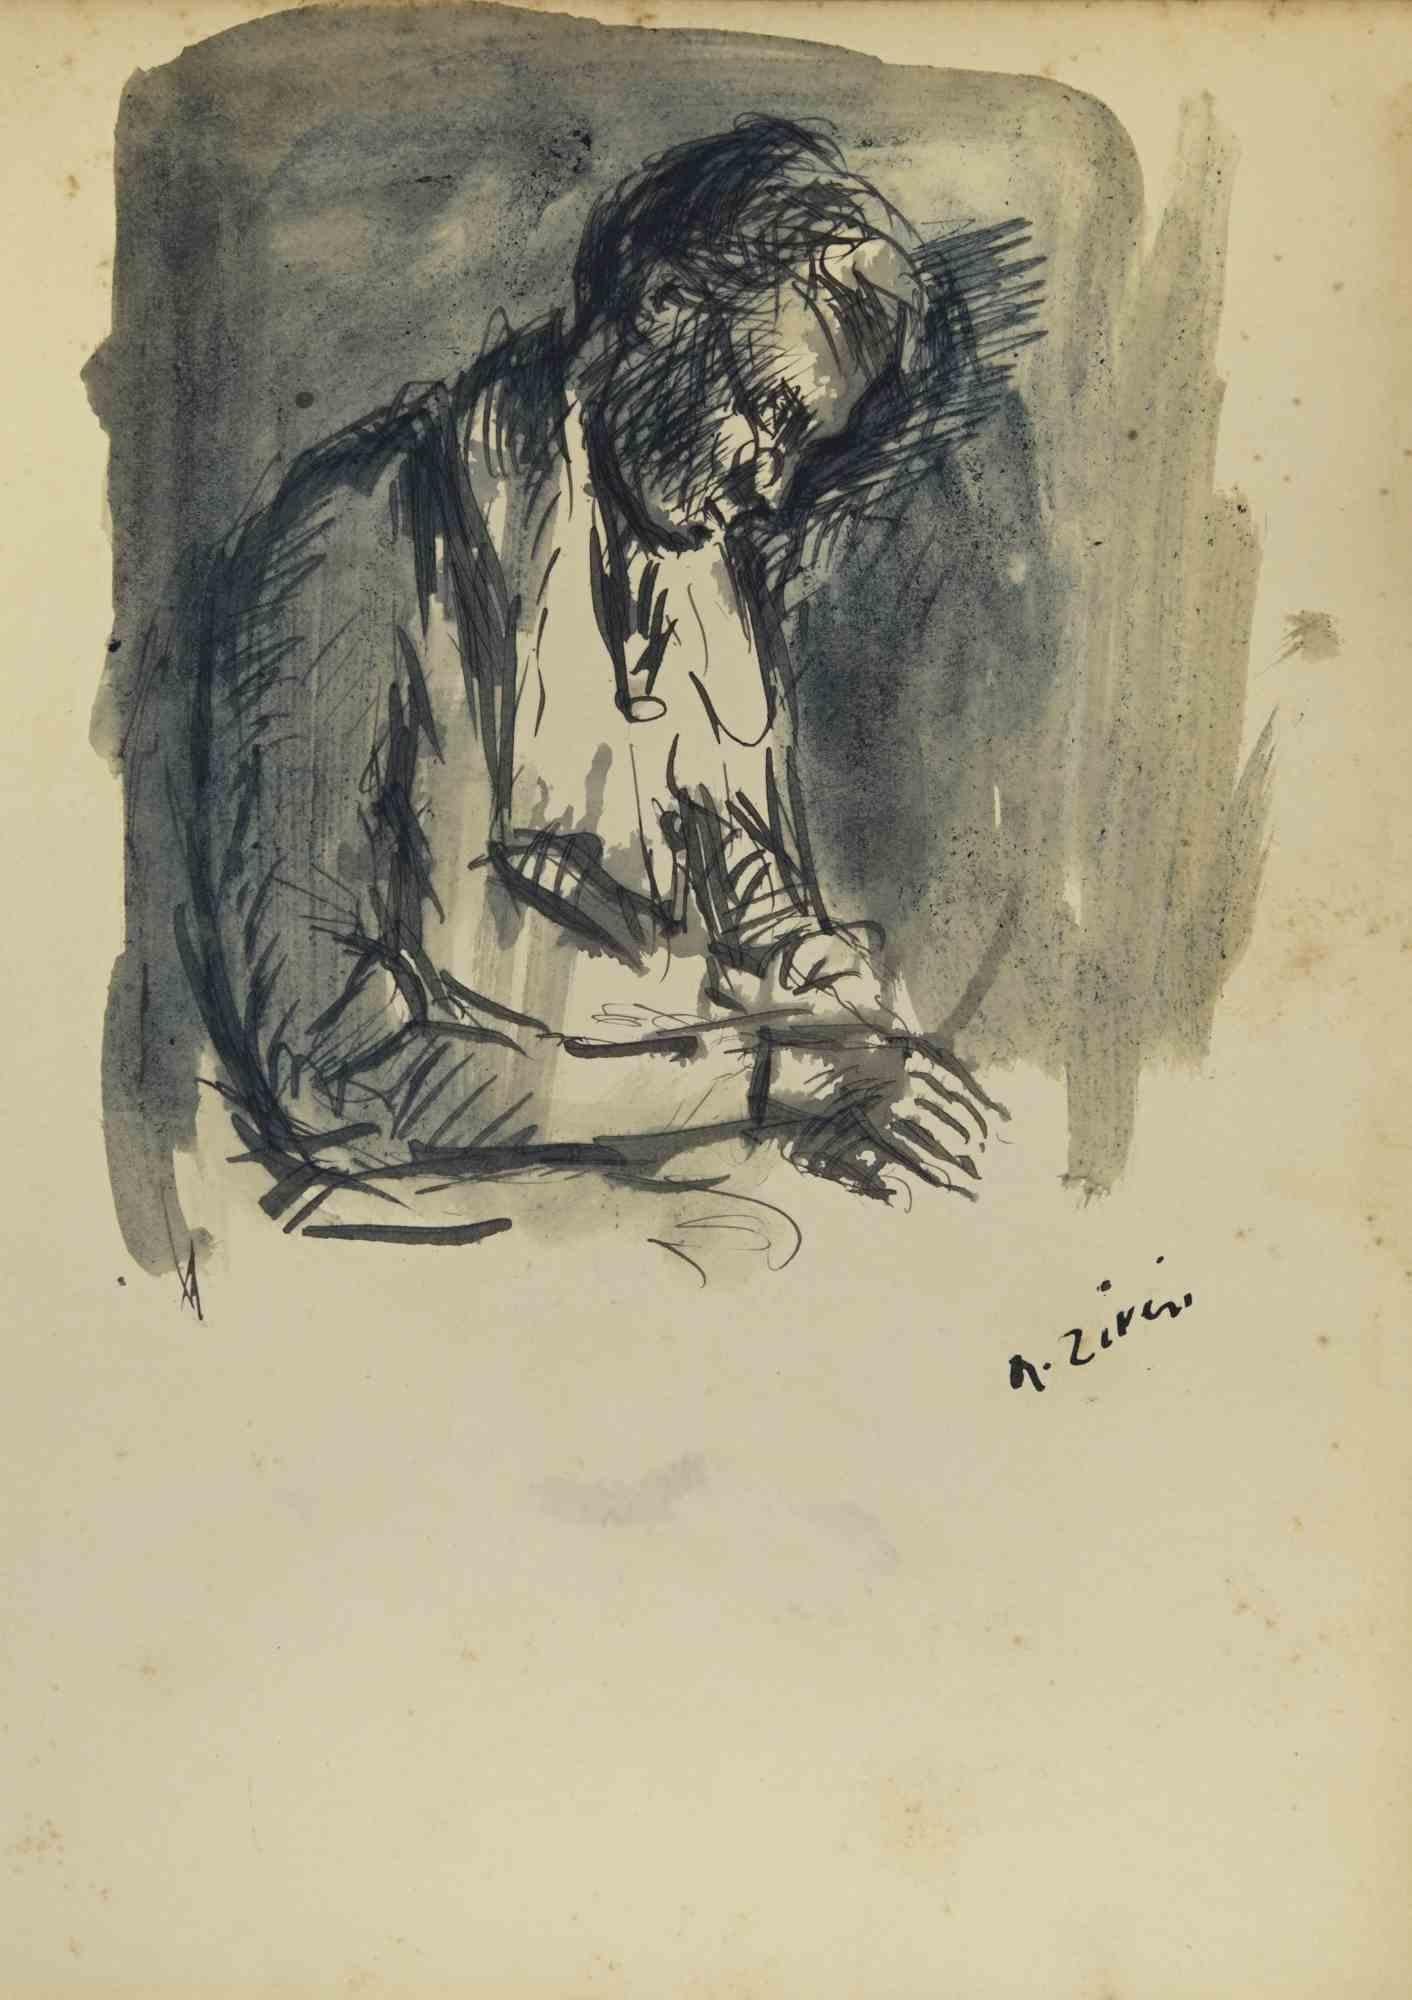 Writing Man is an original drawing realized by Alberto Ziveri in the 1930s.

Ink and watercolor on paper.

Hand-signed.

In good conditions with slight foxing.

The artwork is represented through deft strokes masterly.

Alberto Ziveri (Rome,1908 –